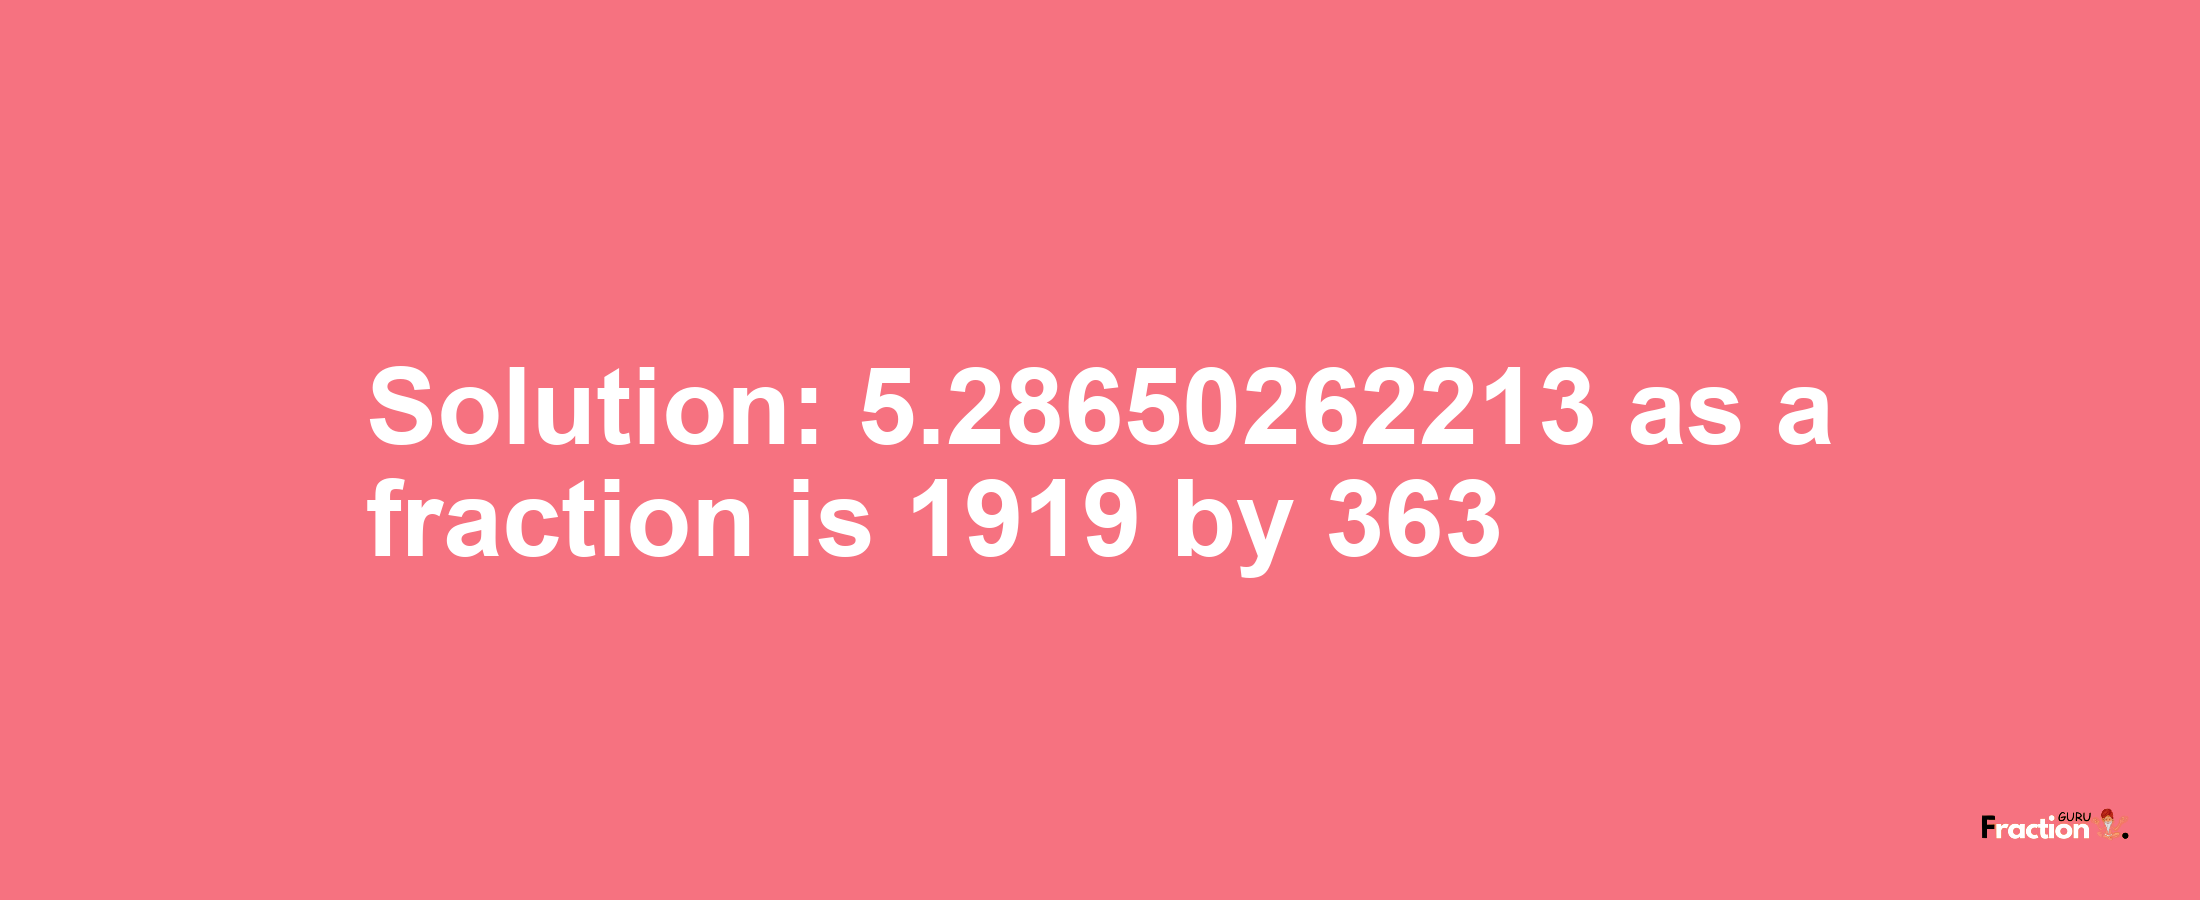 Solution:5.28650262213 as a fraction is 1919/363